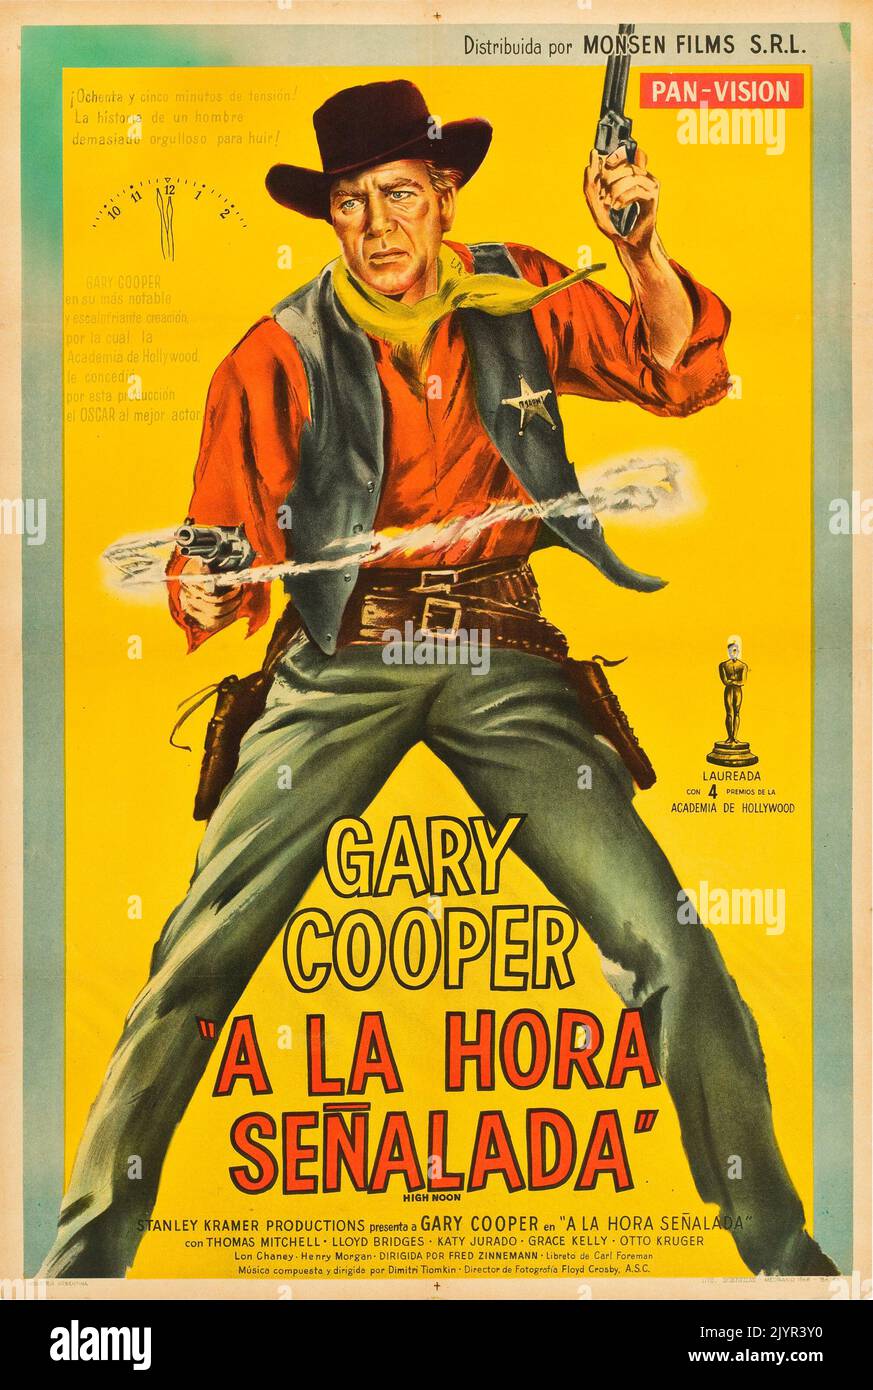 High Noon 1952 (Monsen Films, R-1950s). Argentinean Movie Poster feat Gary Cooper - Western movie Stock Photo